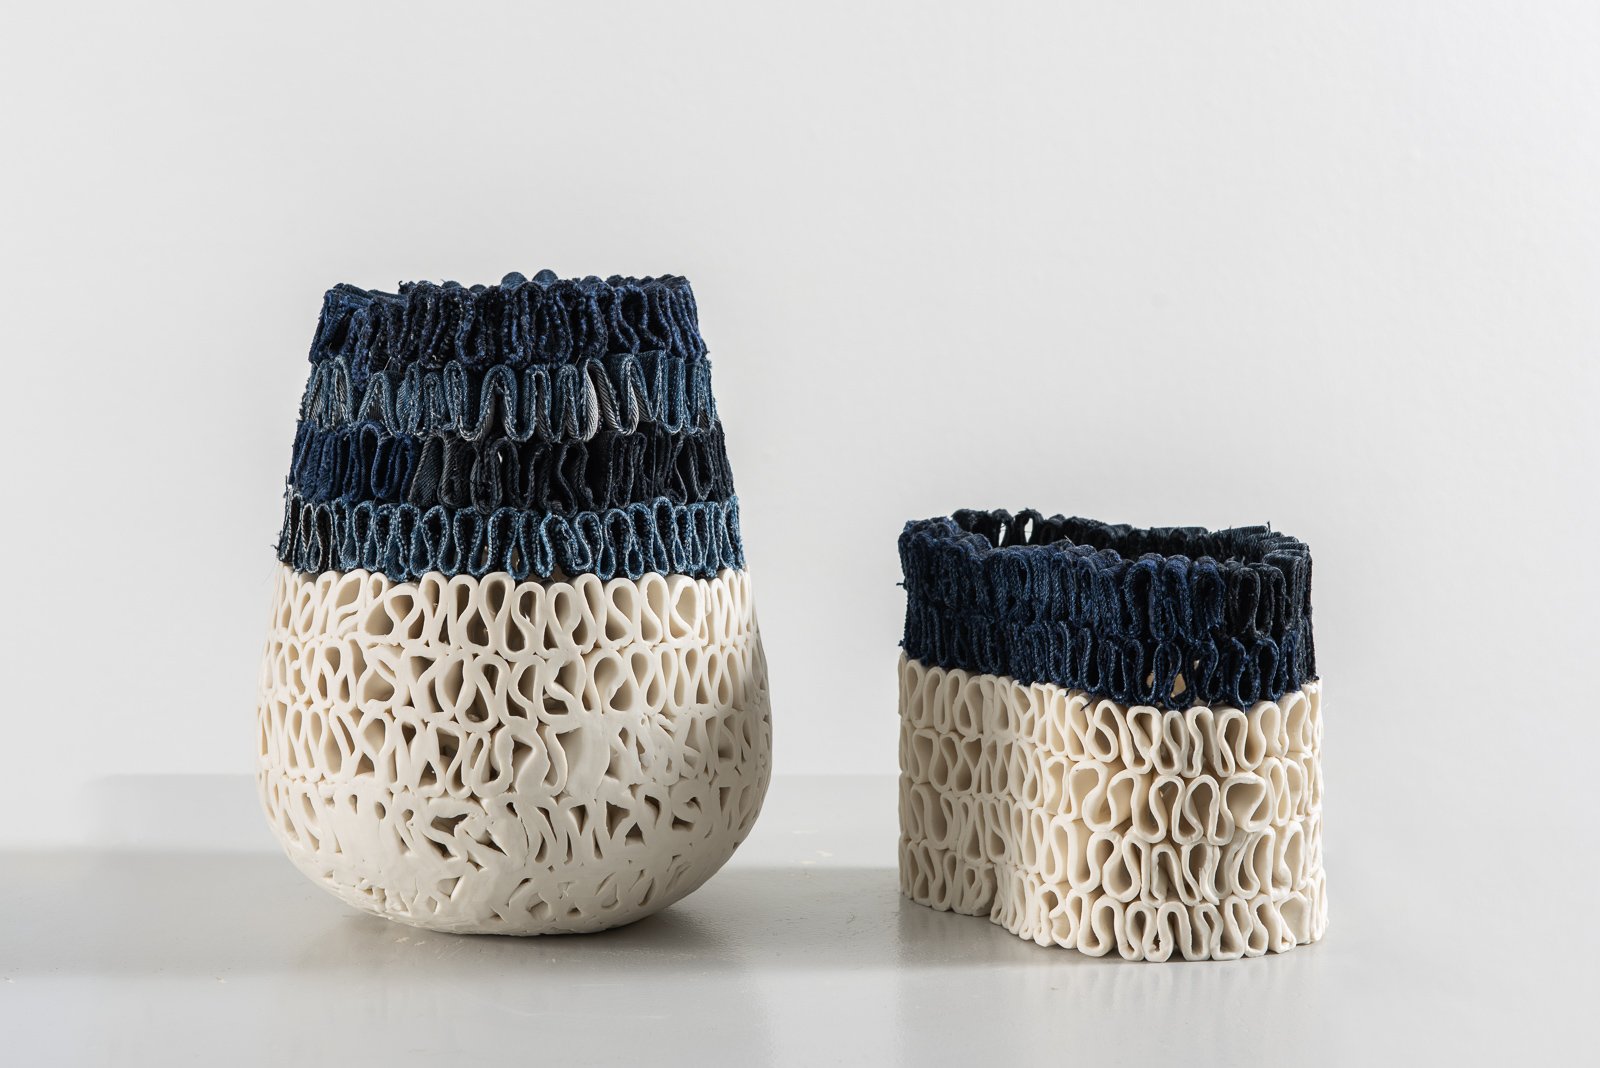  Mimi Swang  Bølge, bolle and Bølge, liten | 2022  Porcelain and textile  Photo: Thomas Tveter 